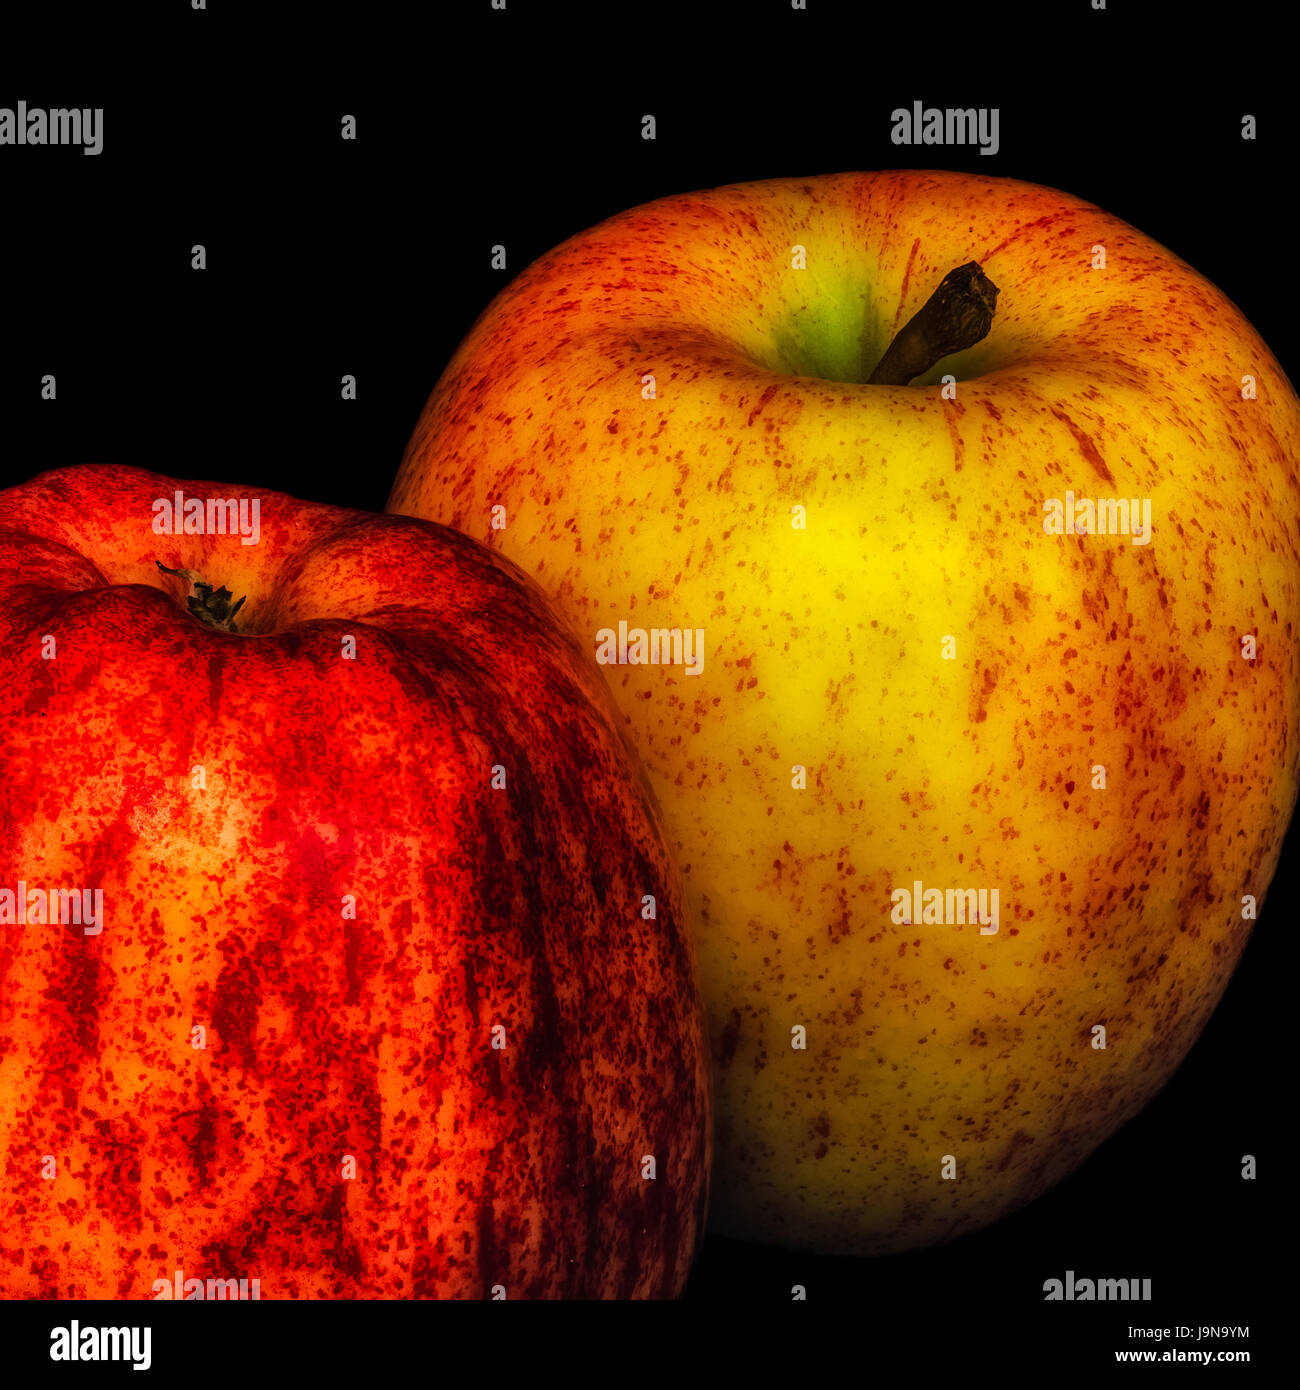 Fine art color macro portrait of two apples on black background Stock Photo